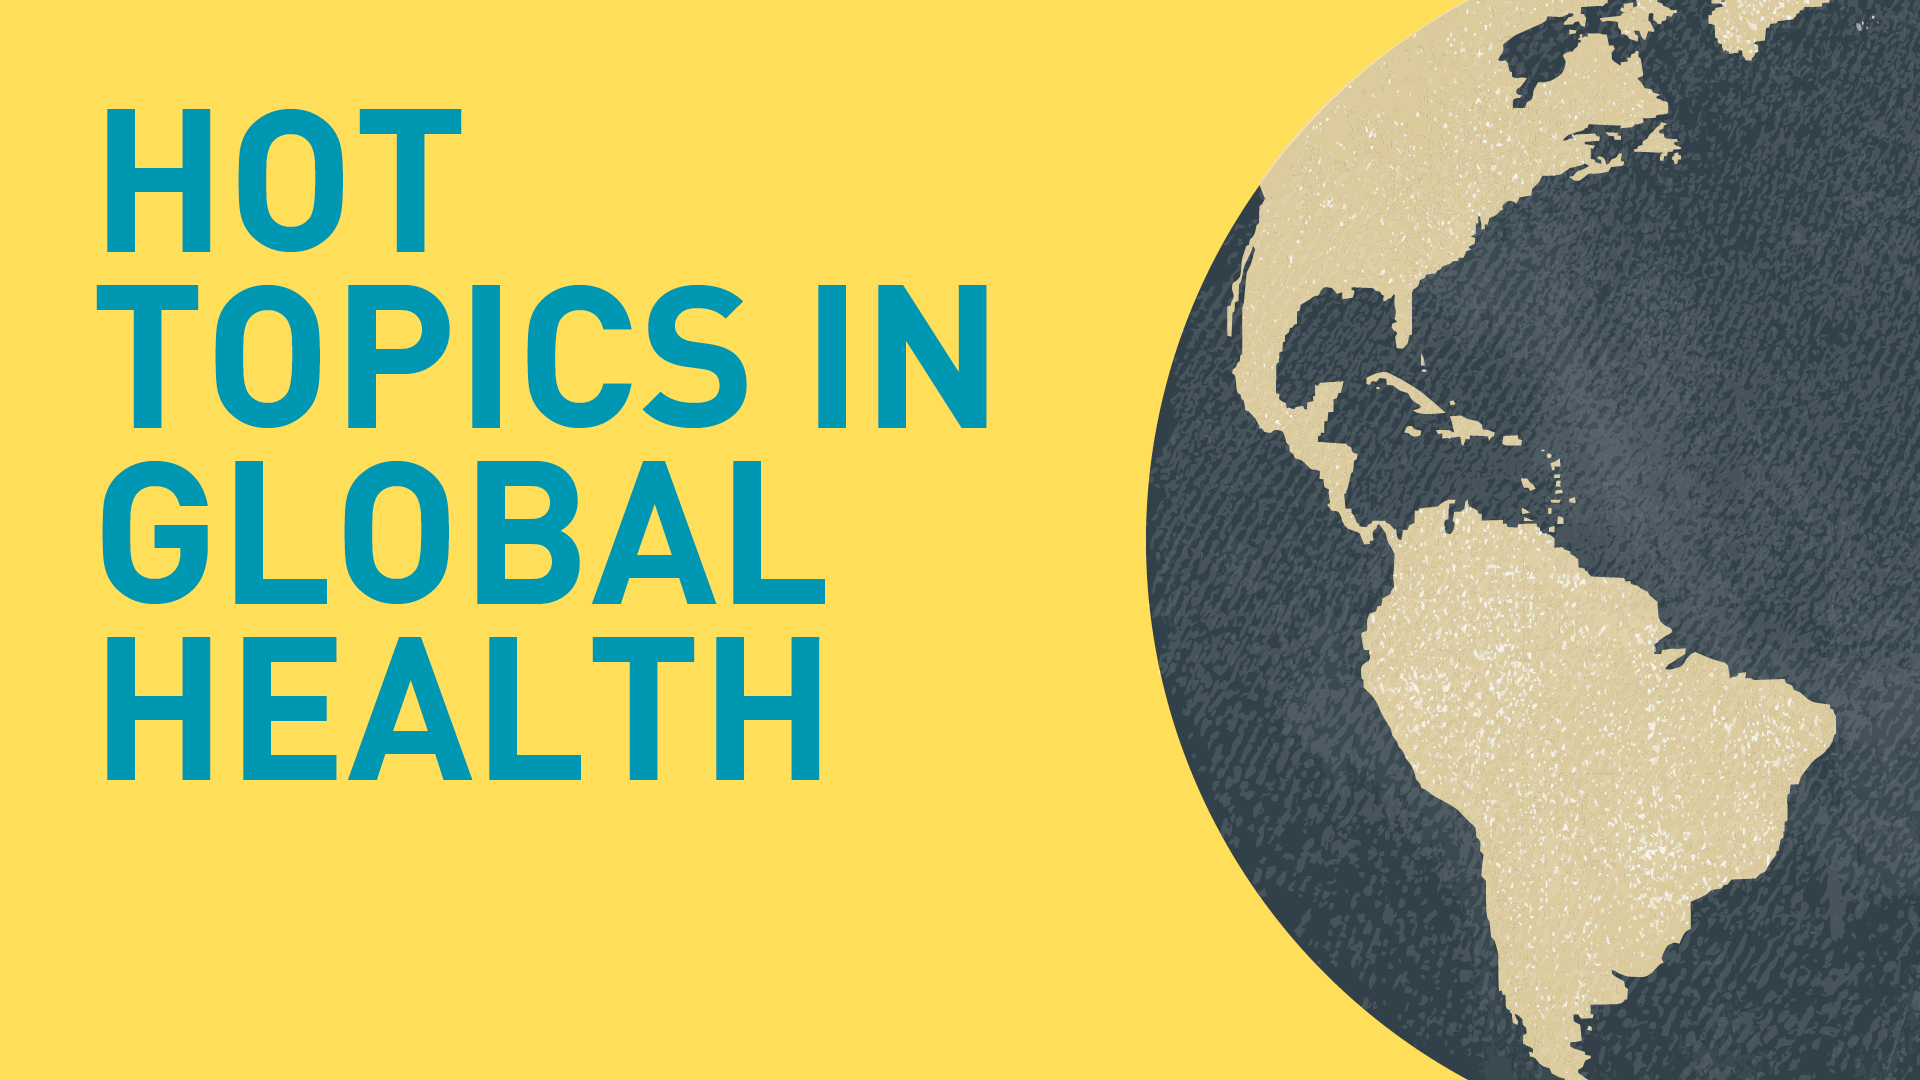 Hot Topics in Global Health conference: Exploring challenges and priorities in low resource settings